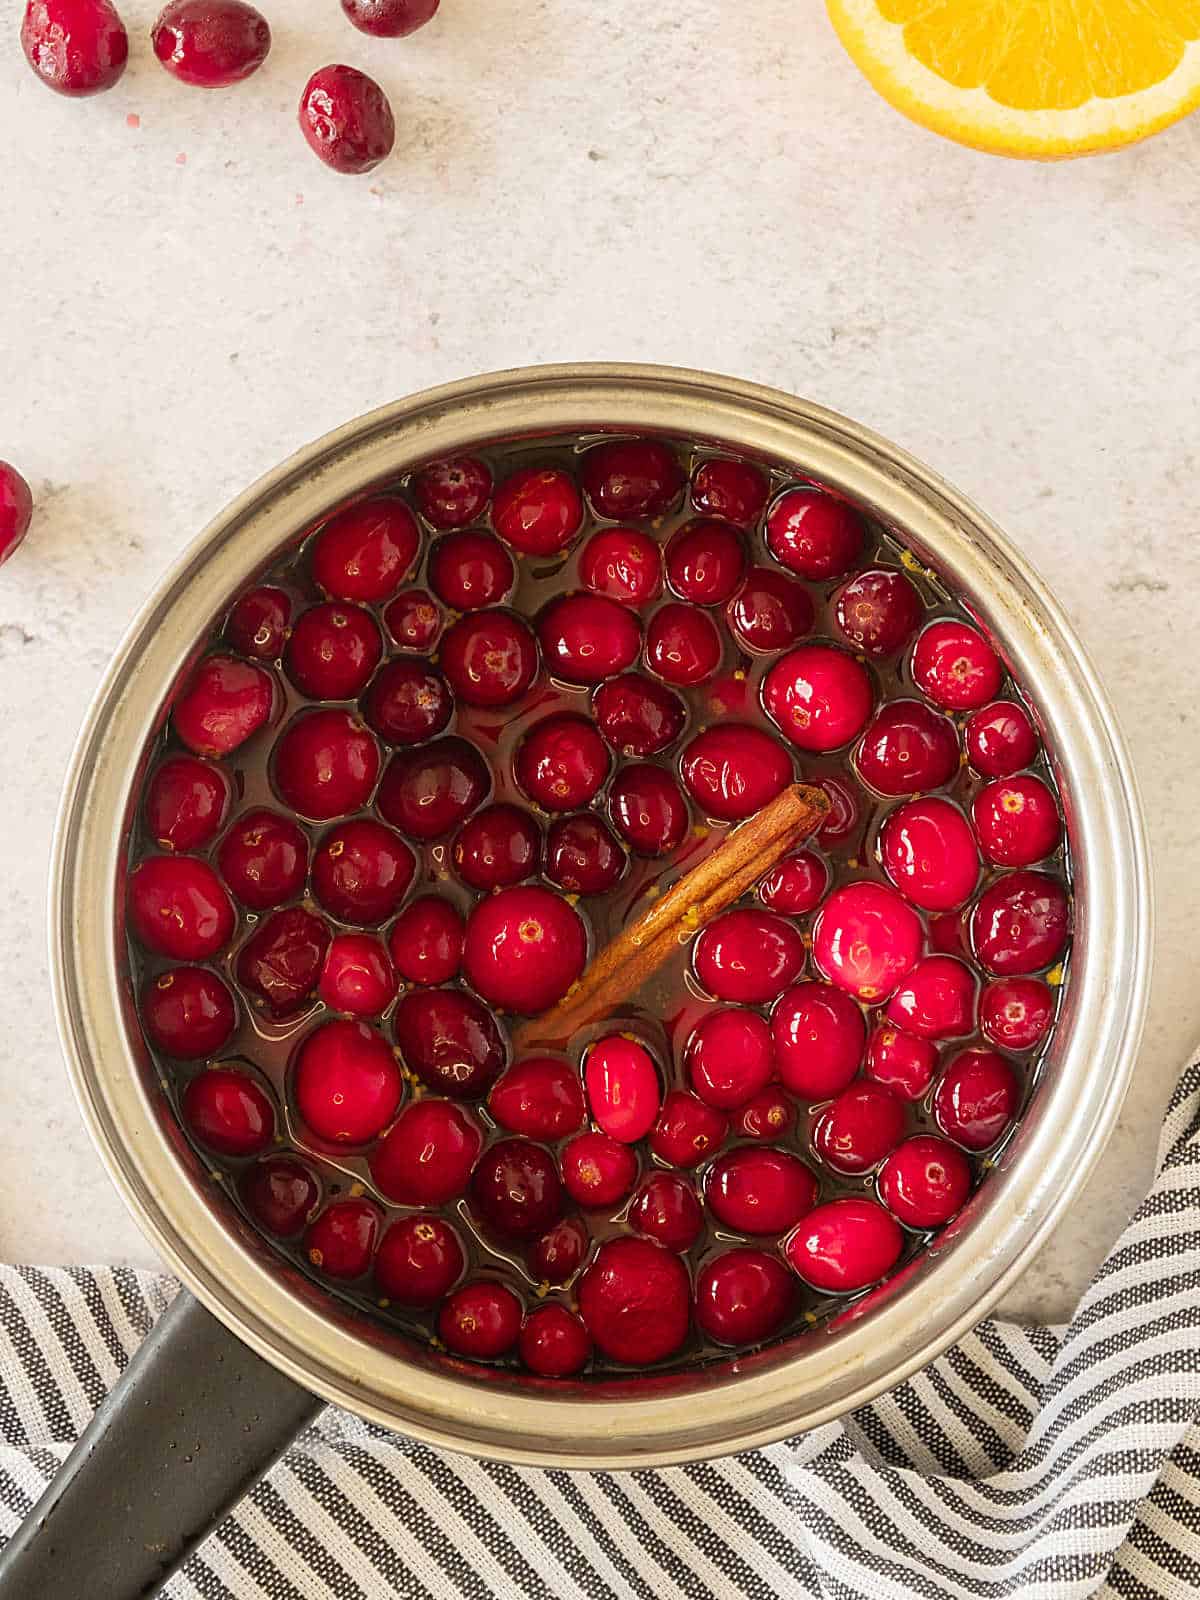 Metal saucepan with cranberries before cooking. Beige surface, striped cloth.